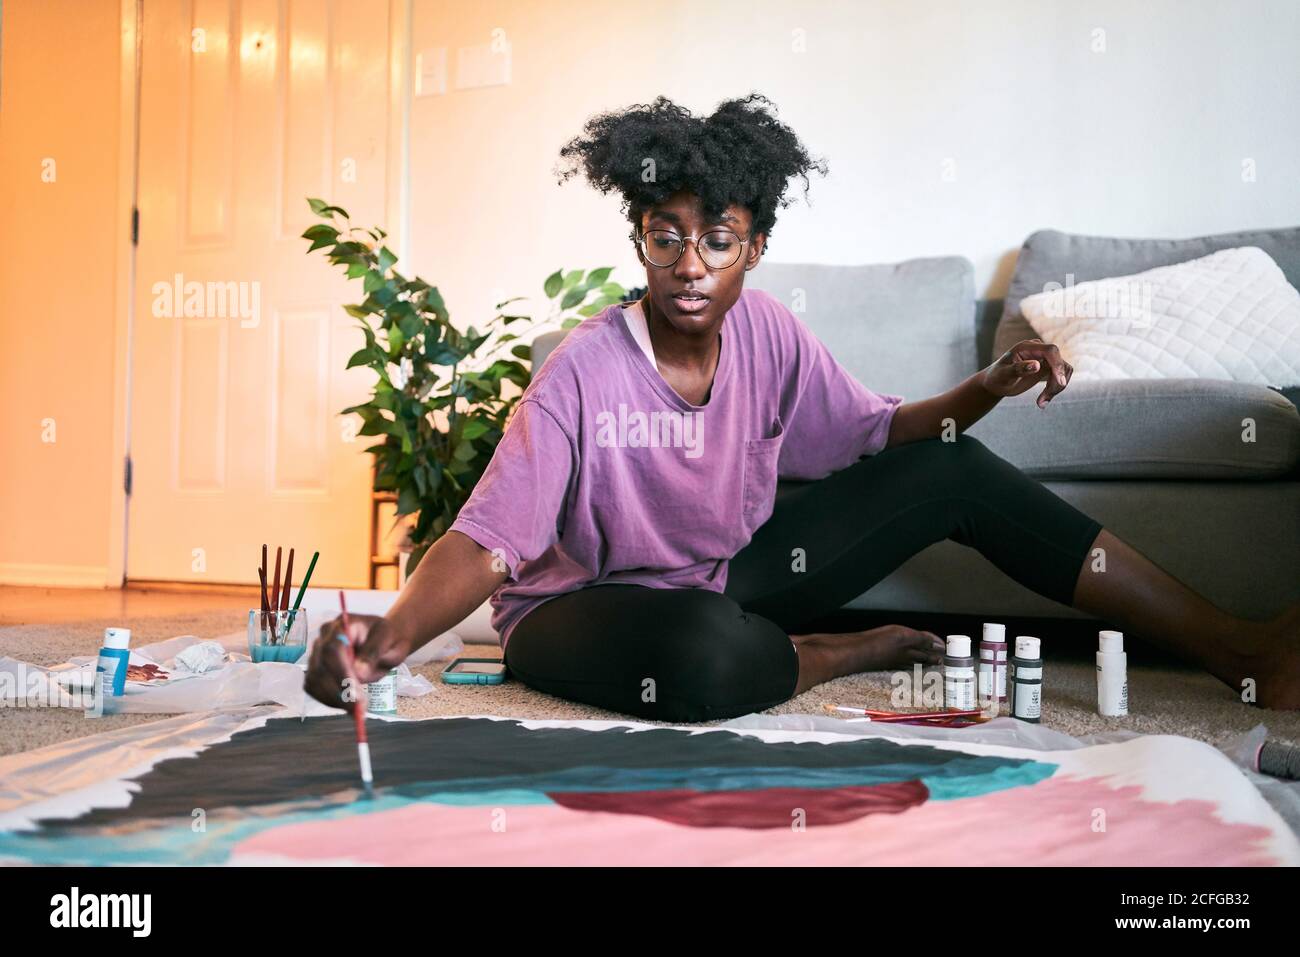 Young happy beautiful African American Woman, amateur artist in casual outfit drawing colorful picture with paintbrush on paper while sitting on floor in cozy apartment Stock Photo